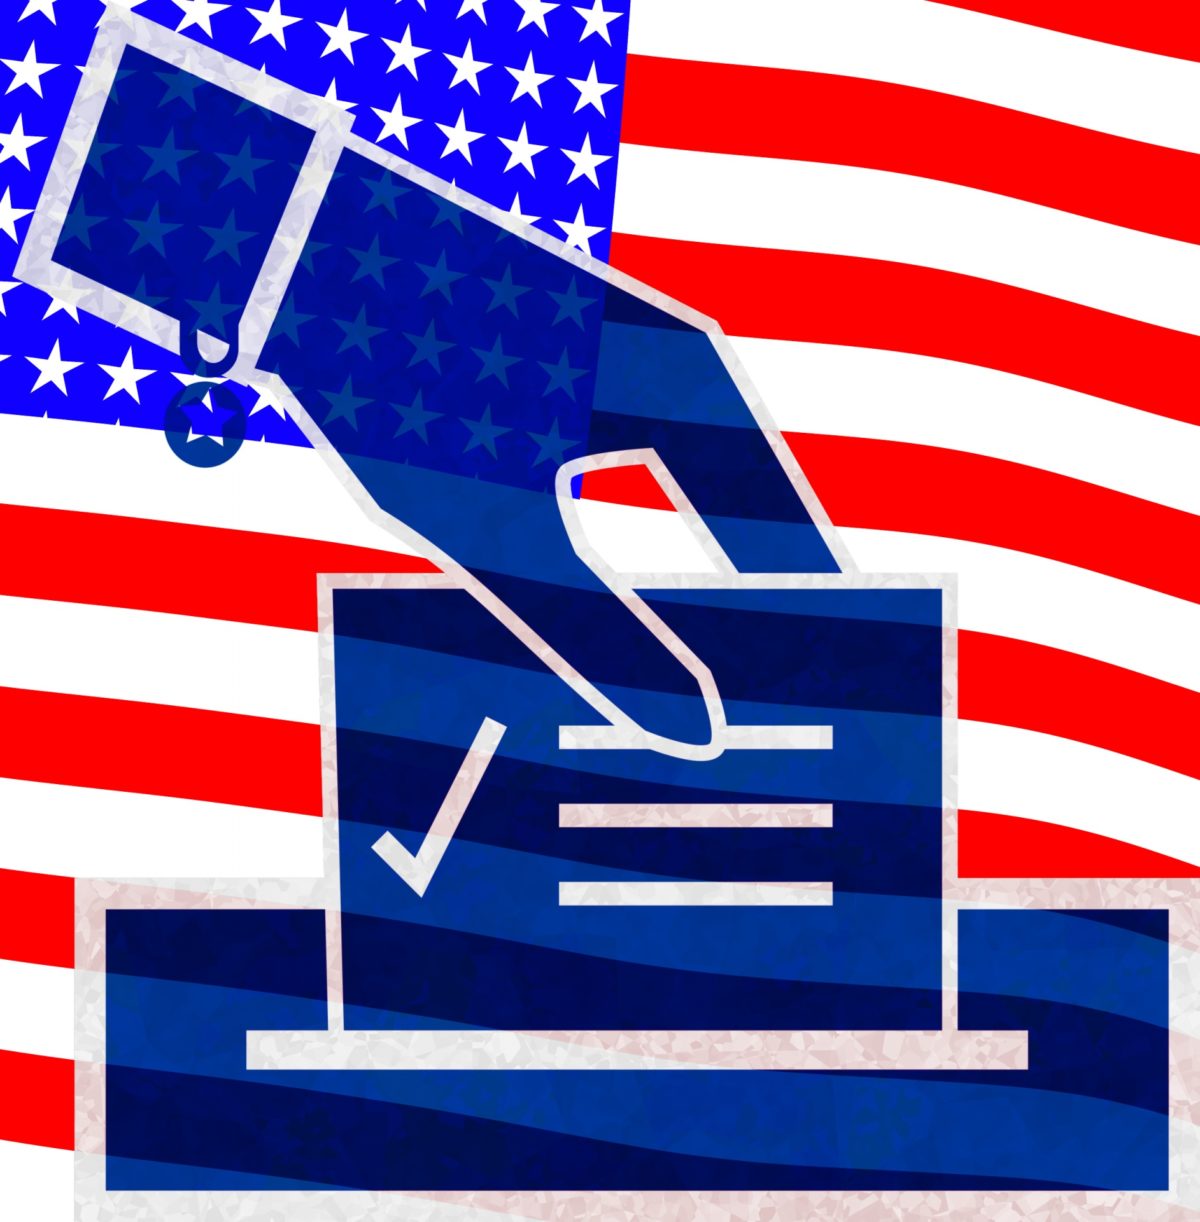 From The Ballot Box: Post-Midterm Election Analysis